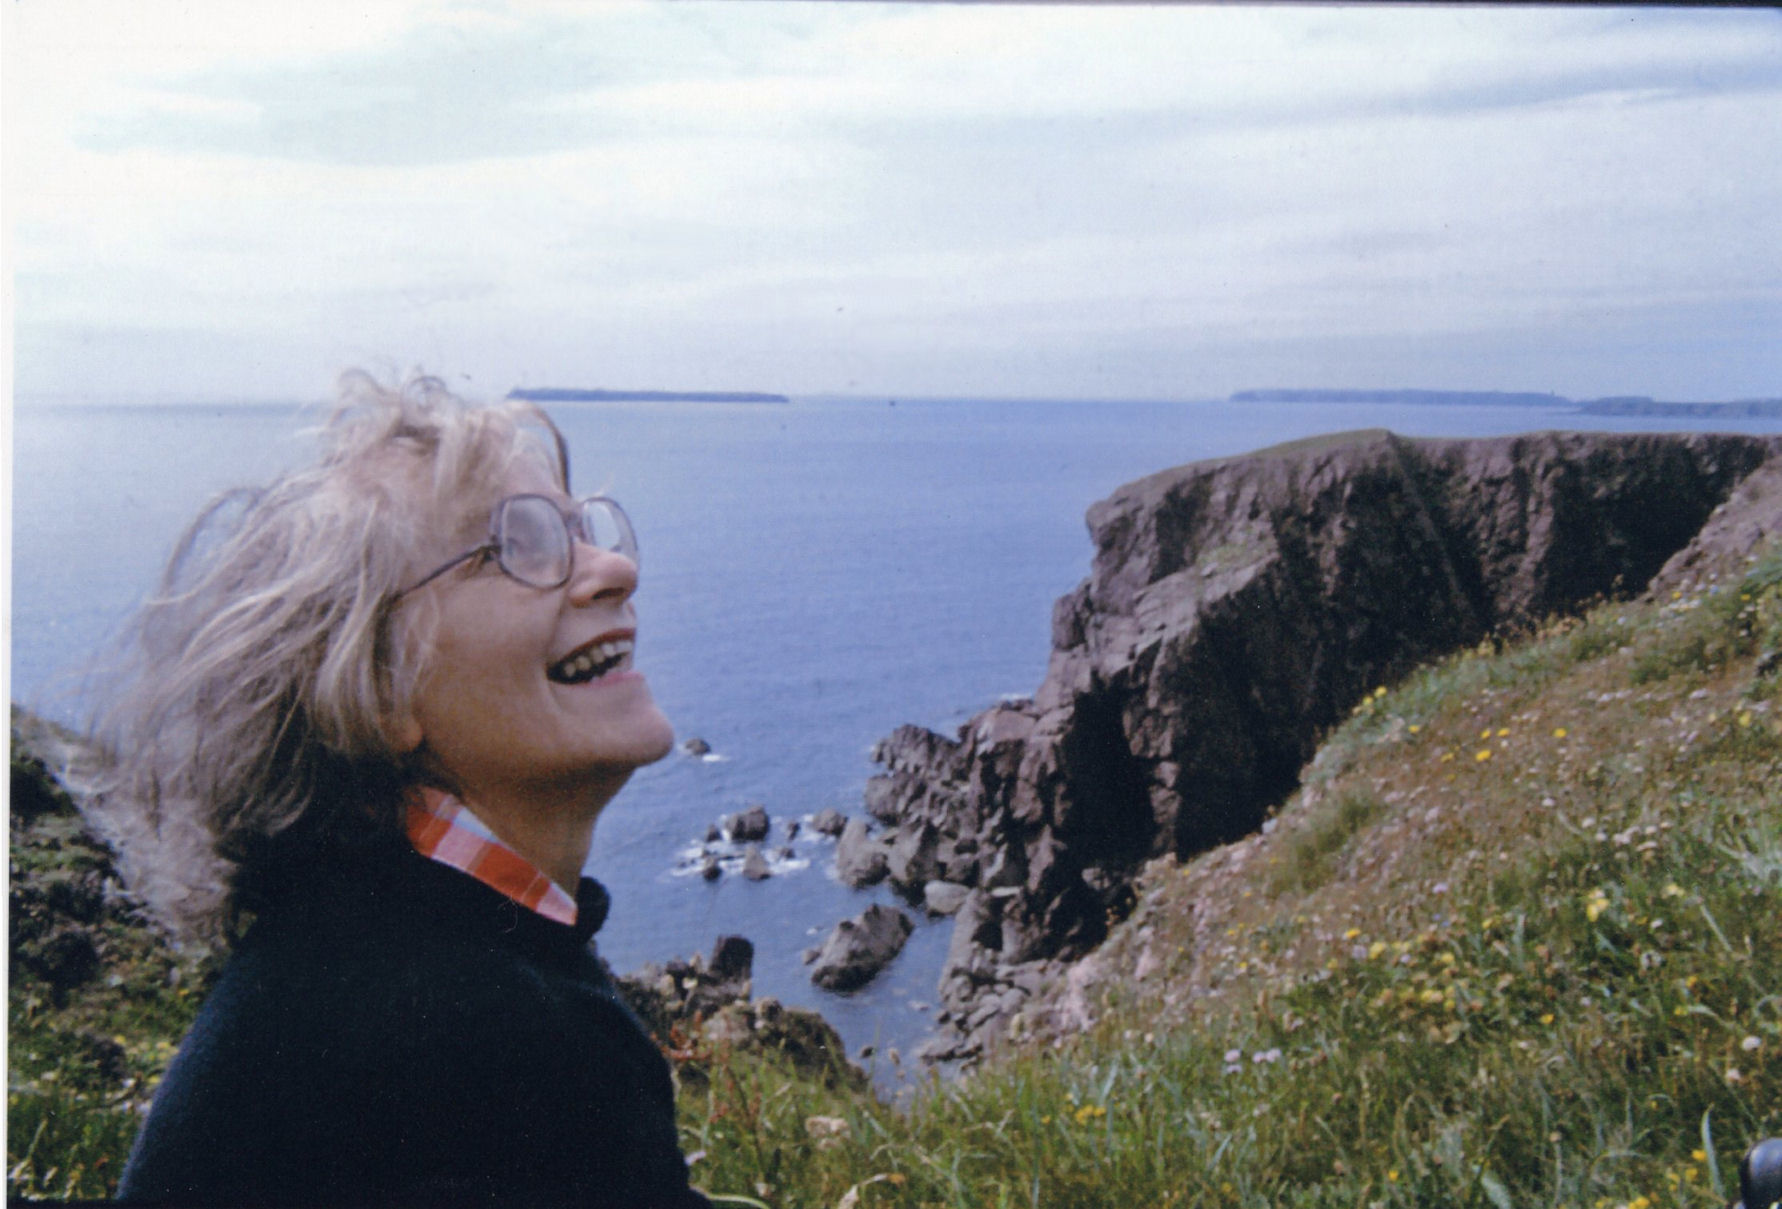 A middle aged woman is smiling looking up at something in the sky, against a backdrop of a rocky coastline with islands in the background